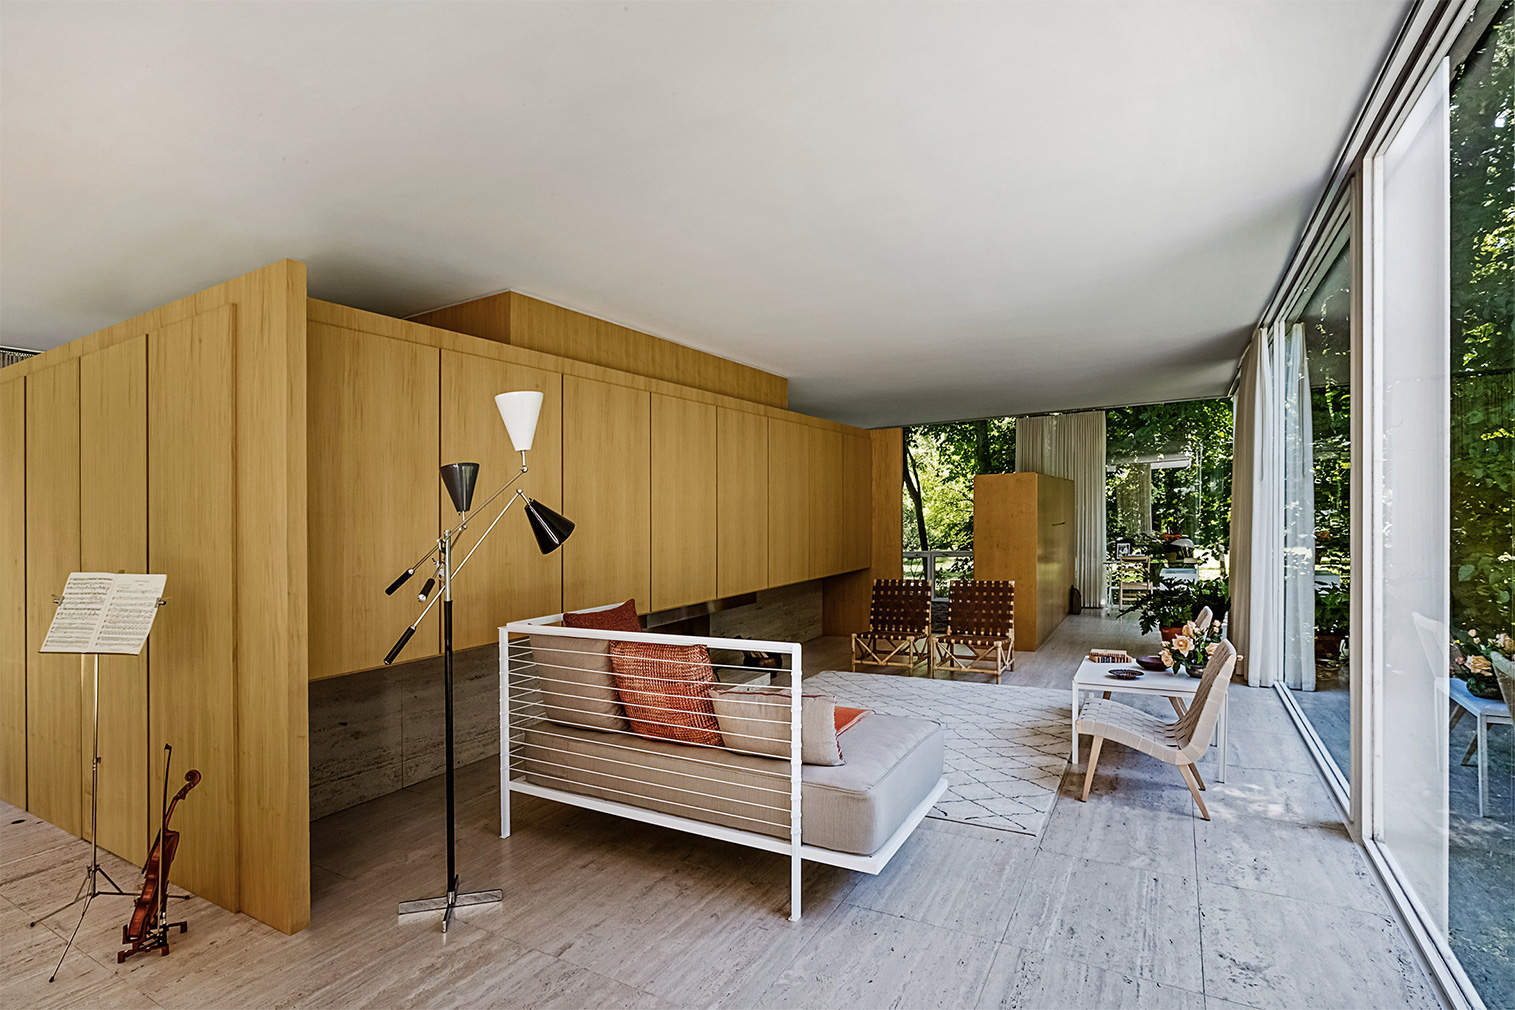 Mies’s iconic Farnsworth House goes back to its original interiors for new show